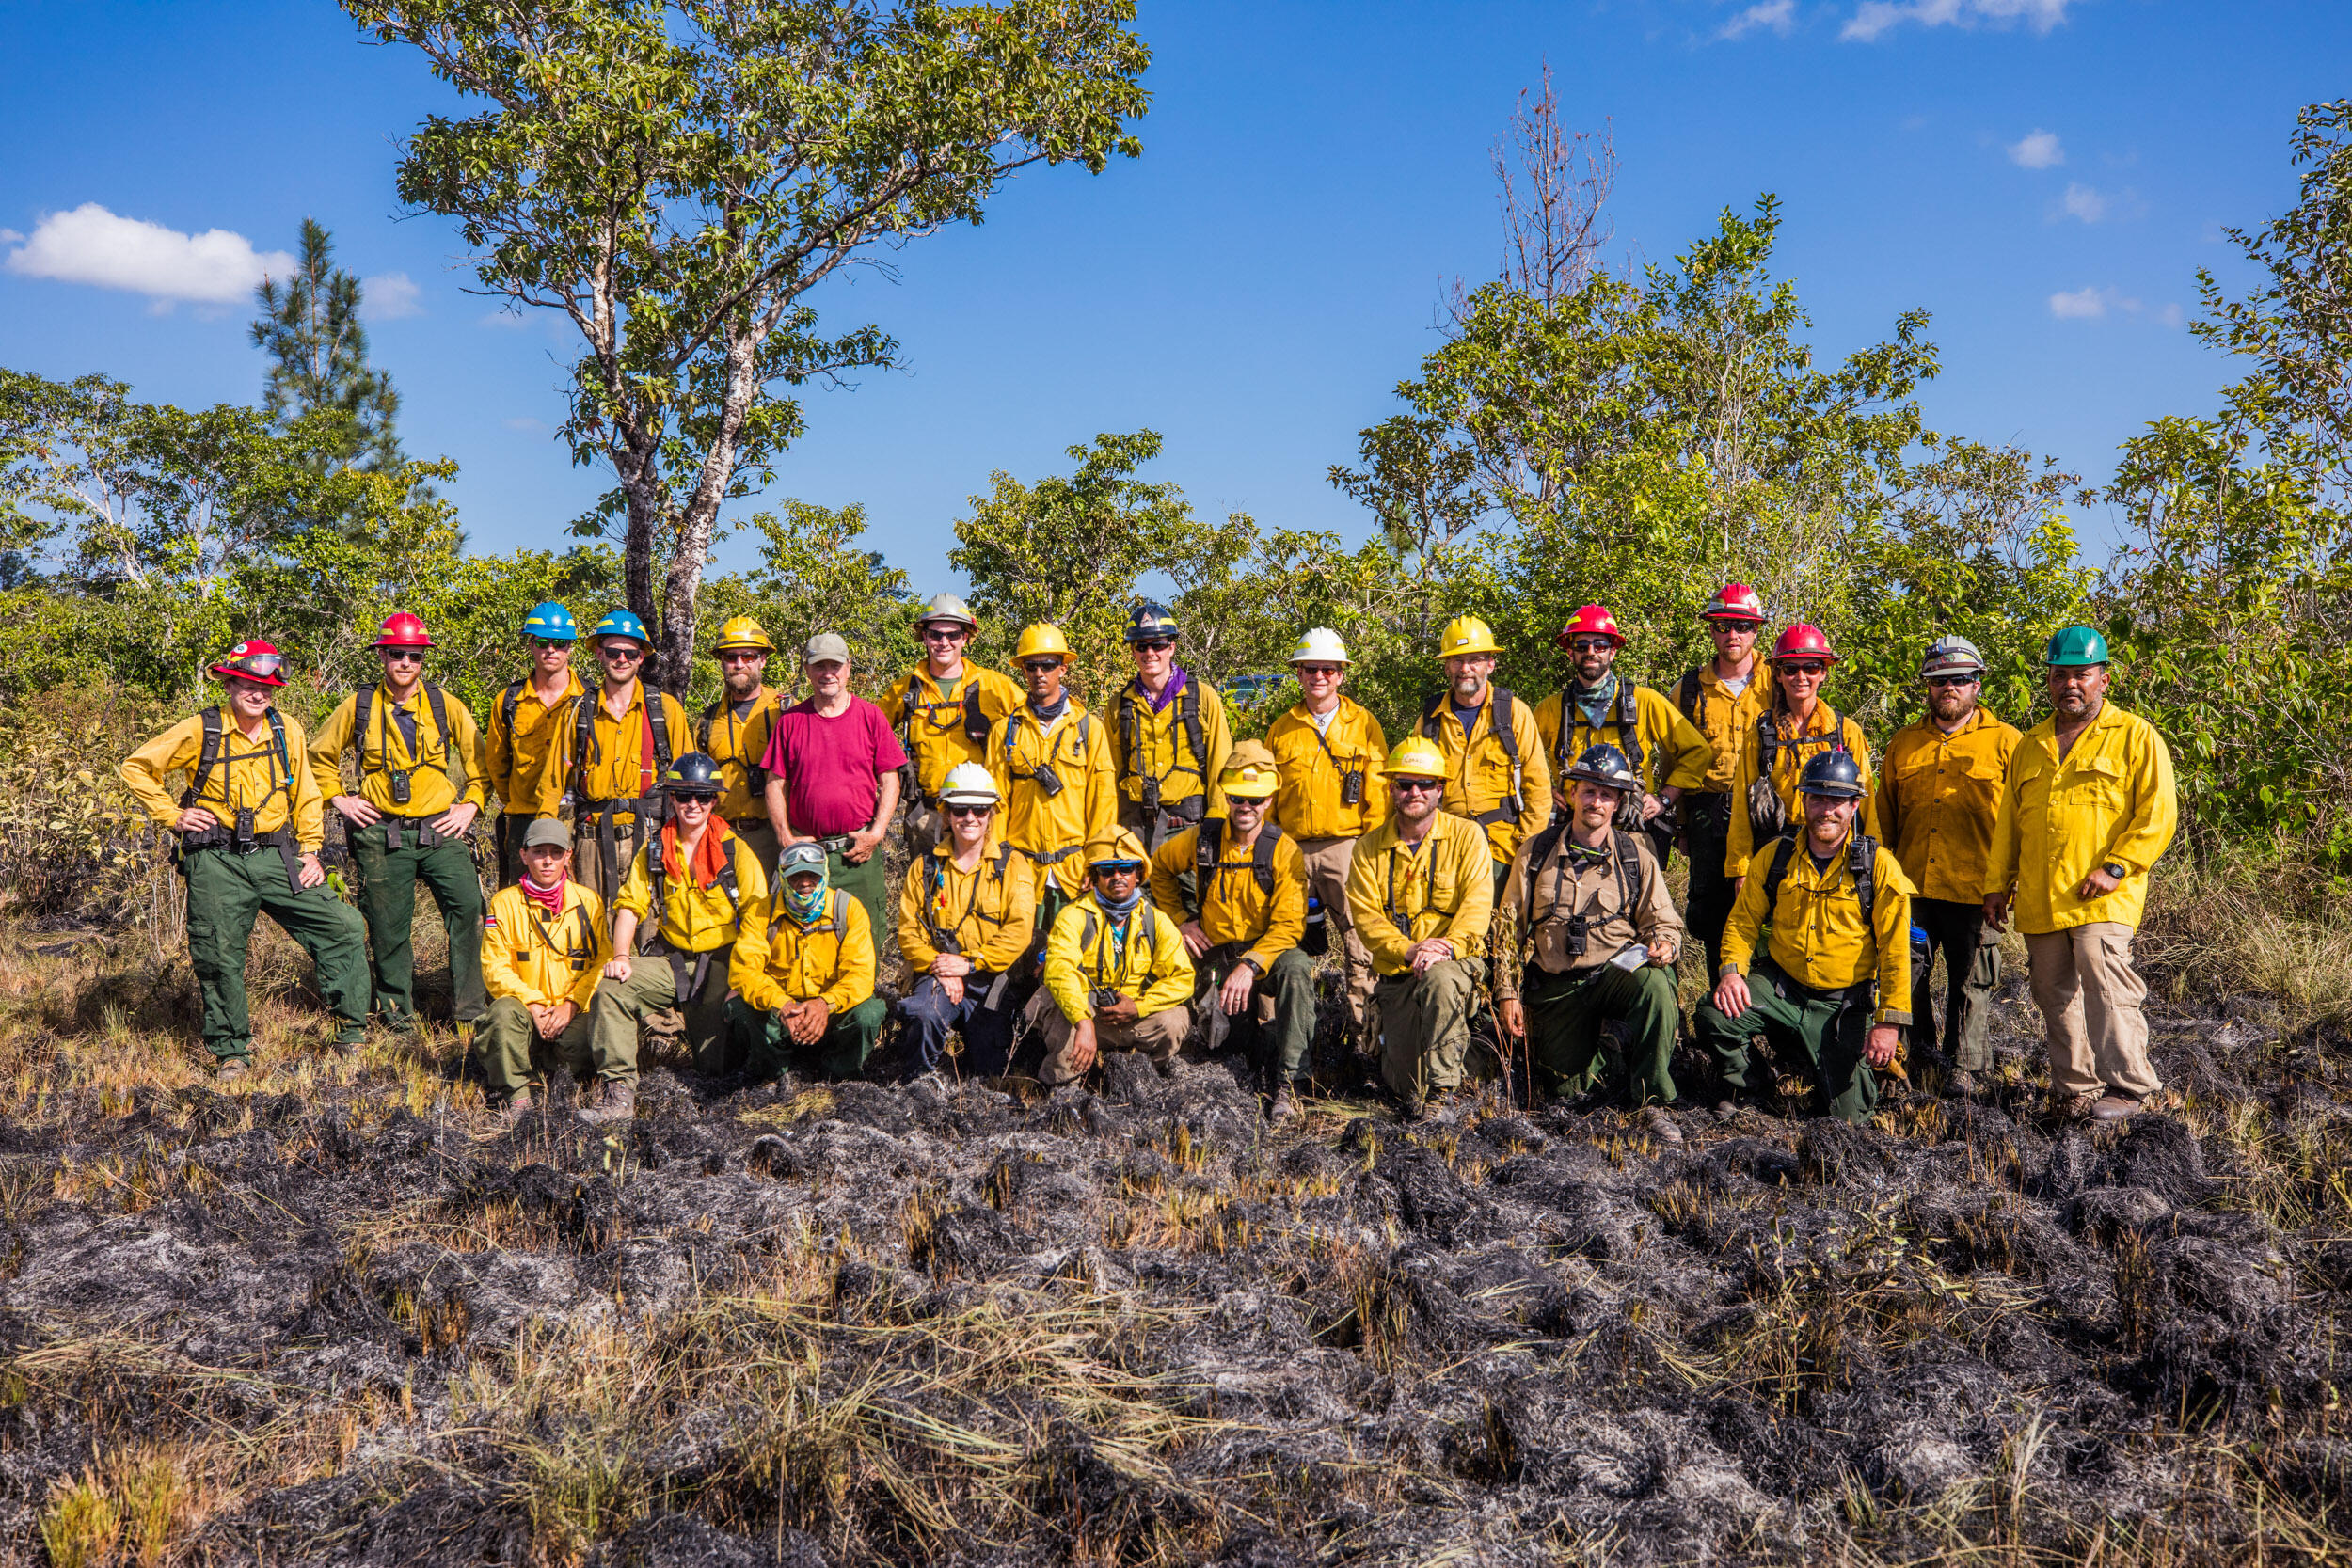 Nearly 30 fire practitioners stand together and pose for a group photo in Belize, following a prescribed fire training exercise.